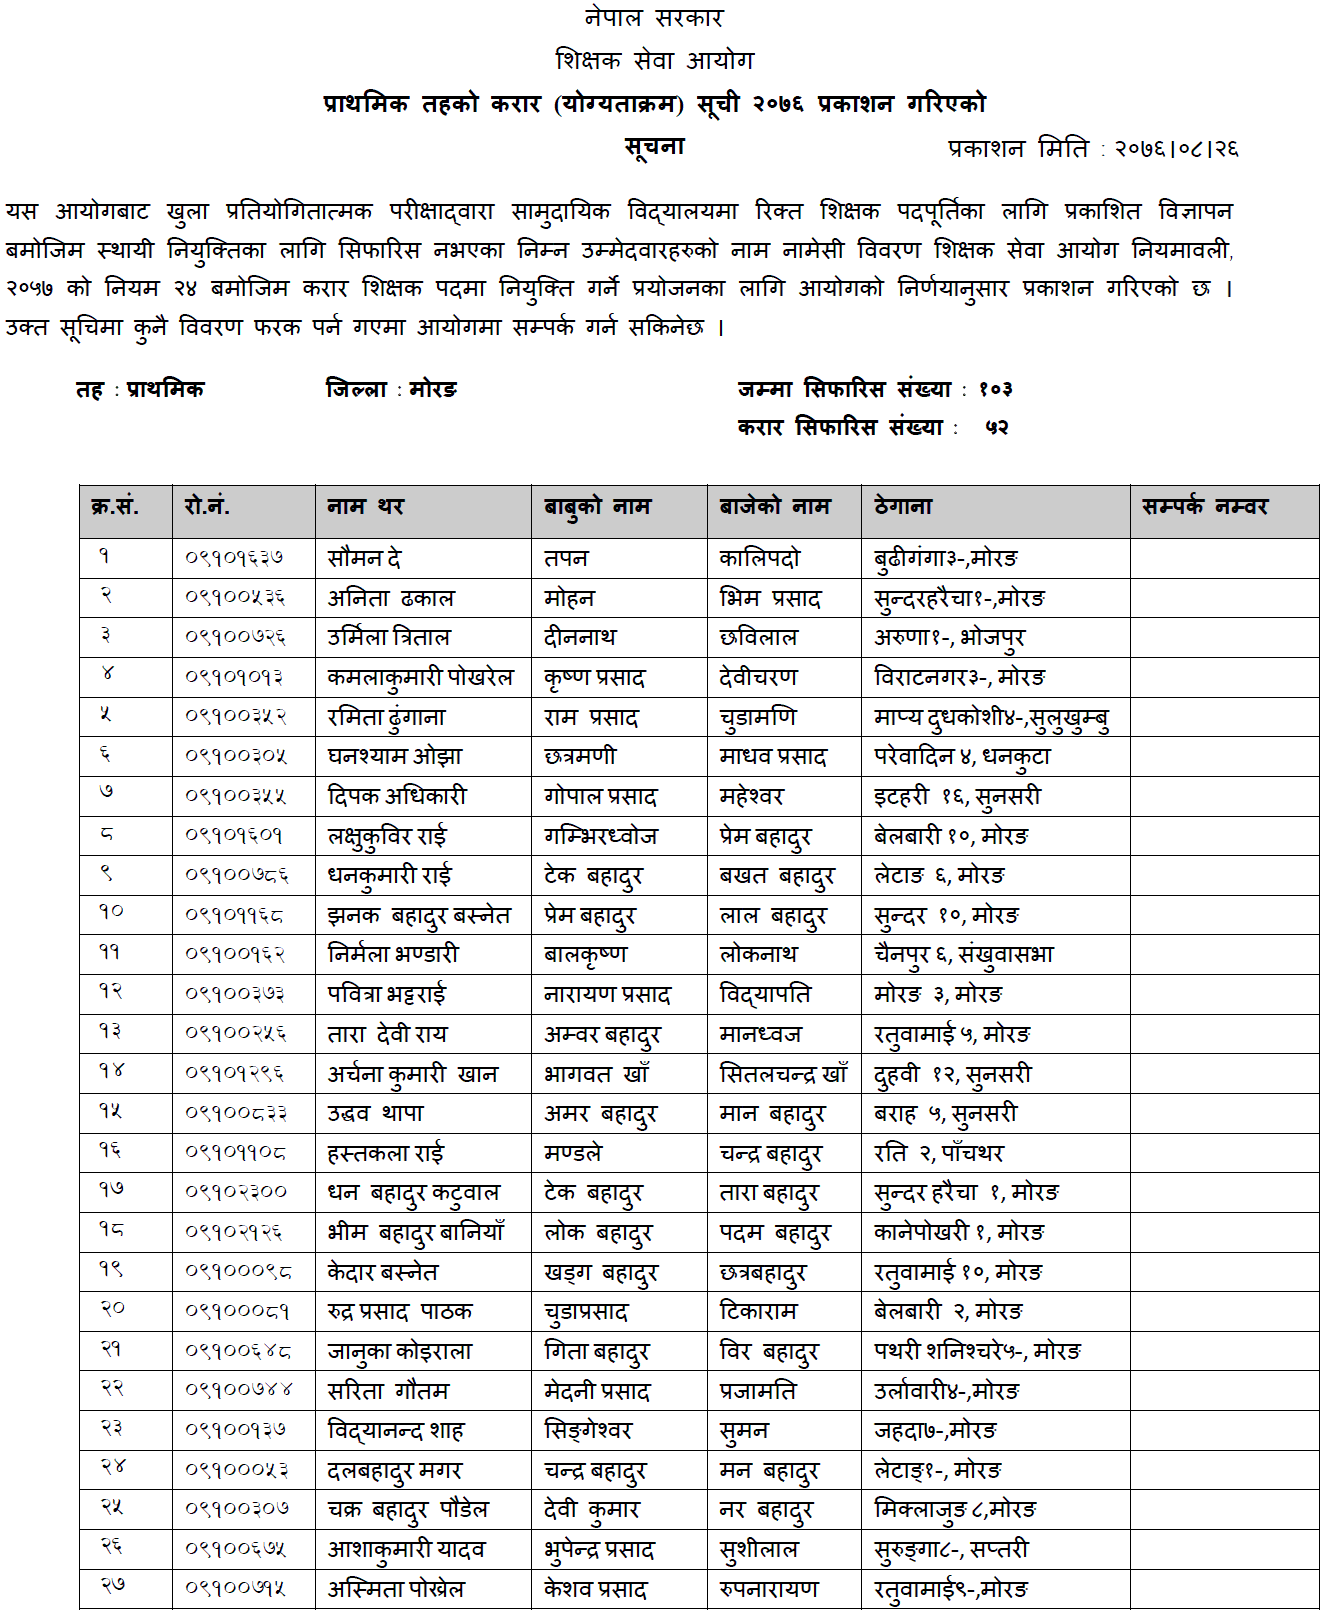 TSC Published Primary Level Contract List of Morang District